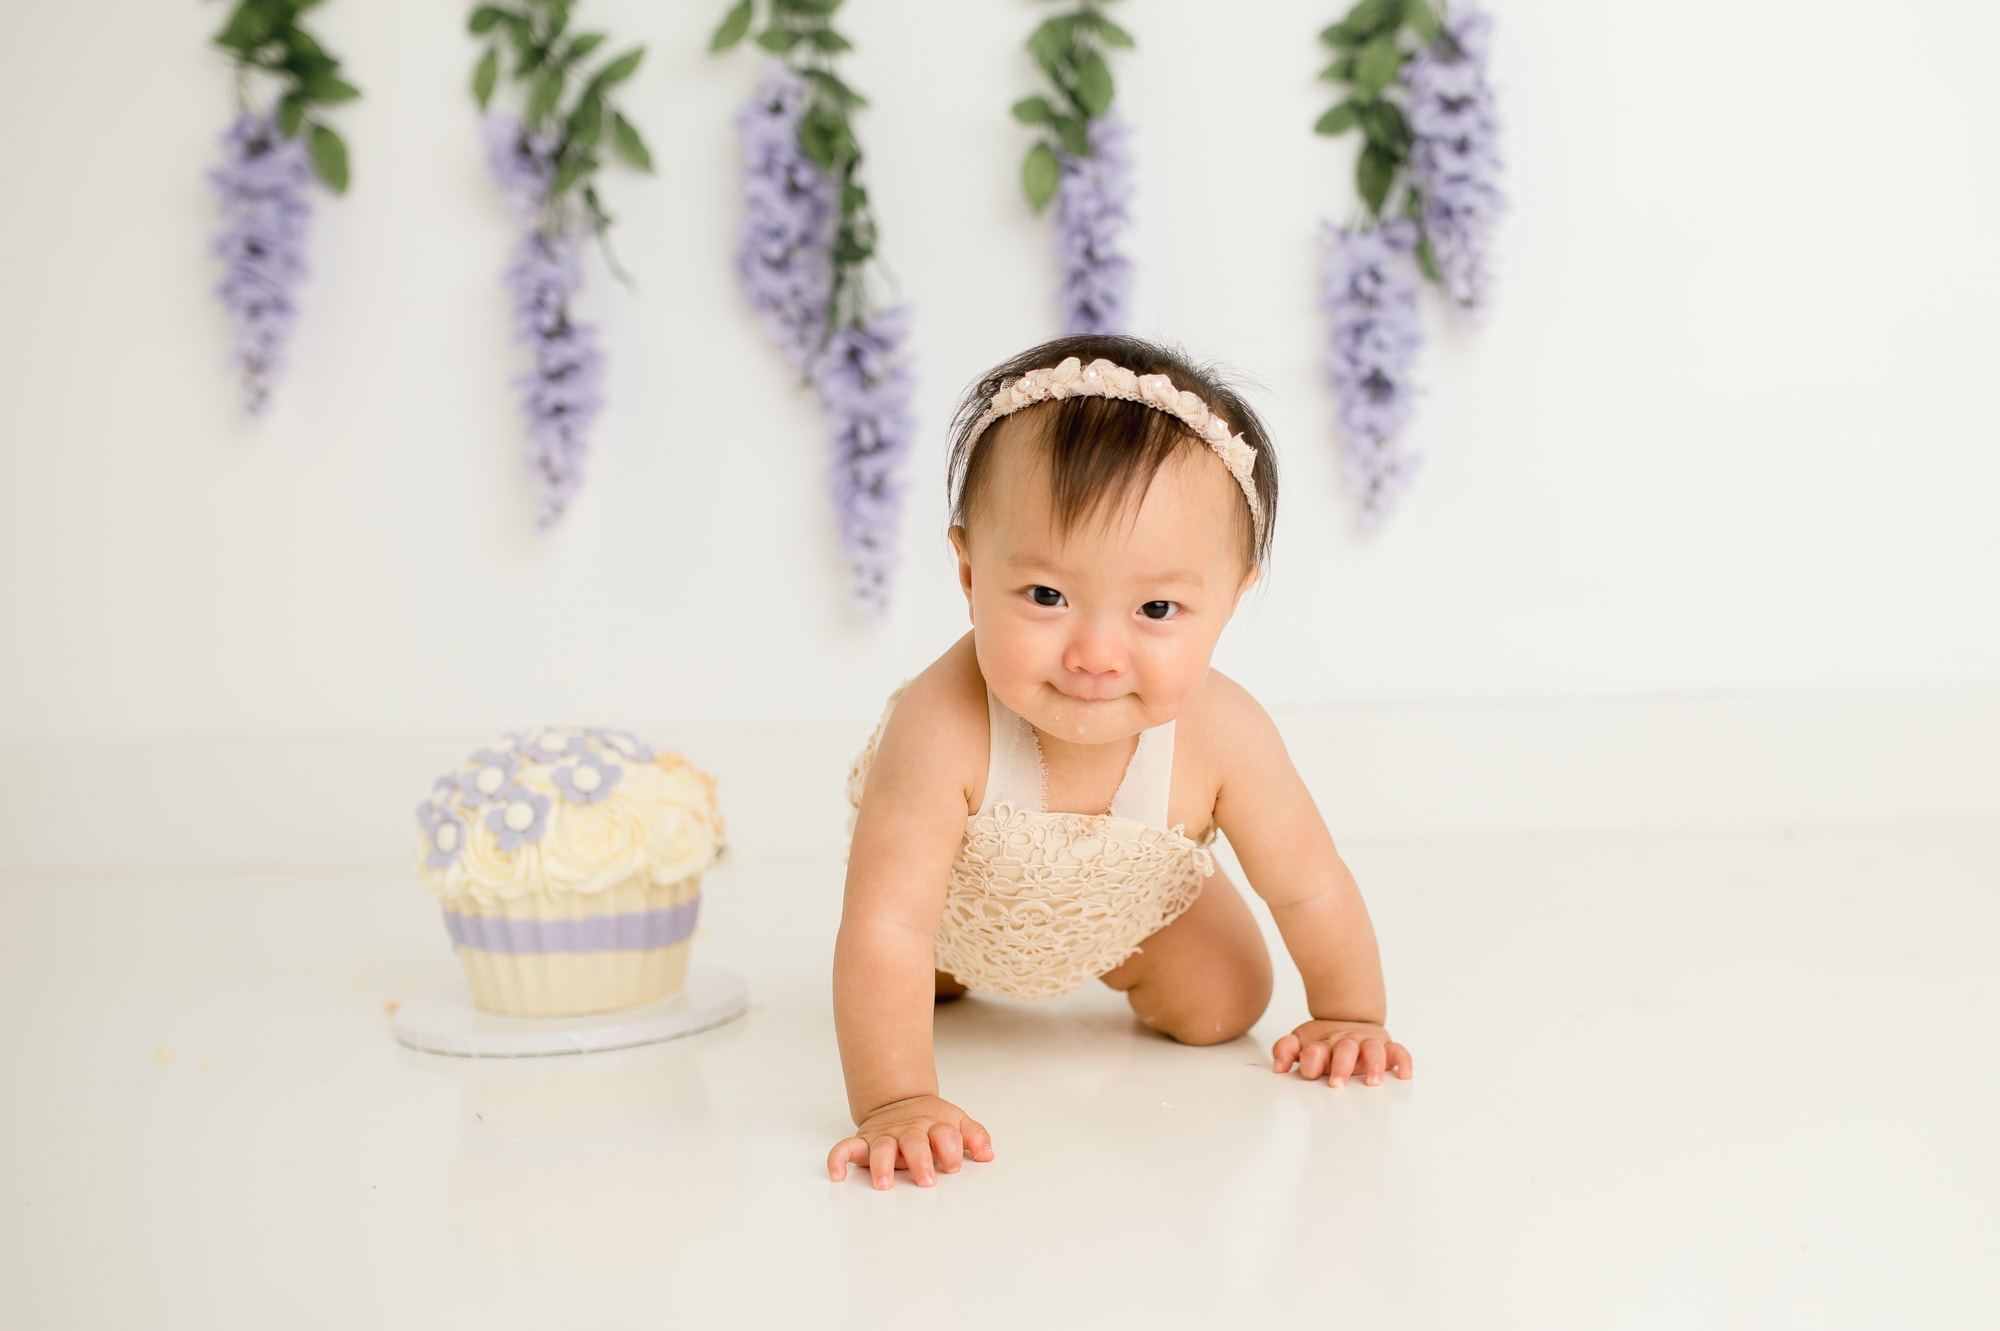 Baby girl crawls towards camera next to a lavender and white cake and hanging purple wisteria backdrop.